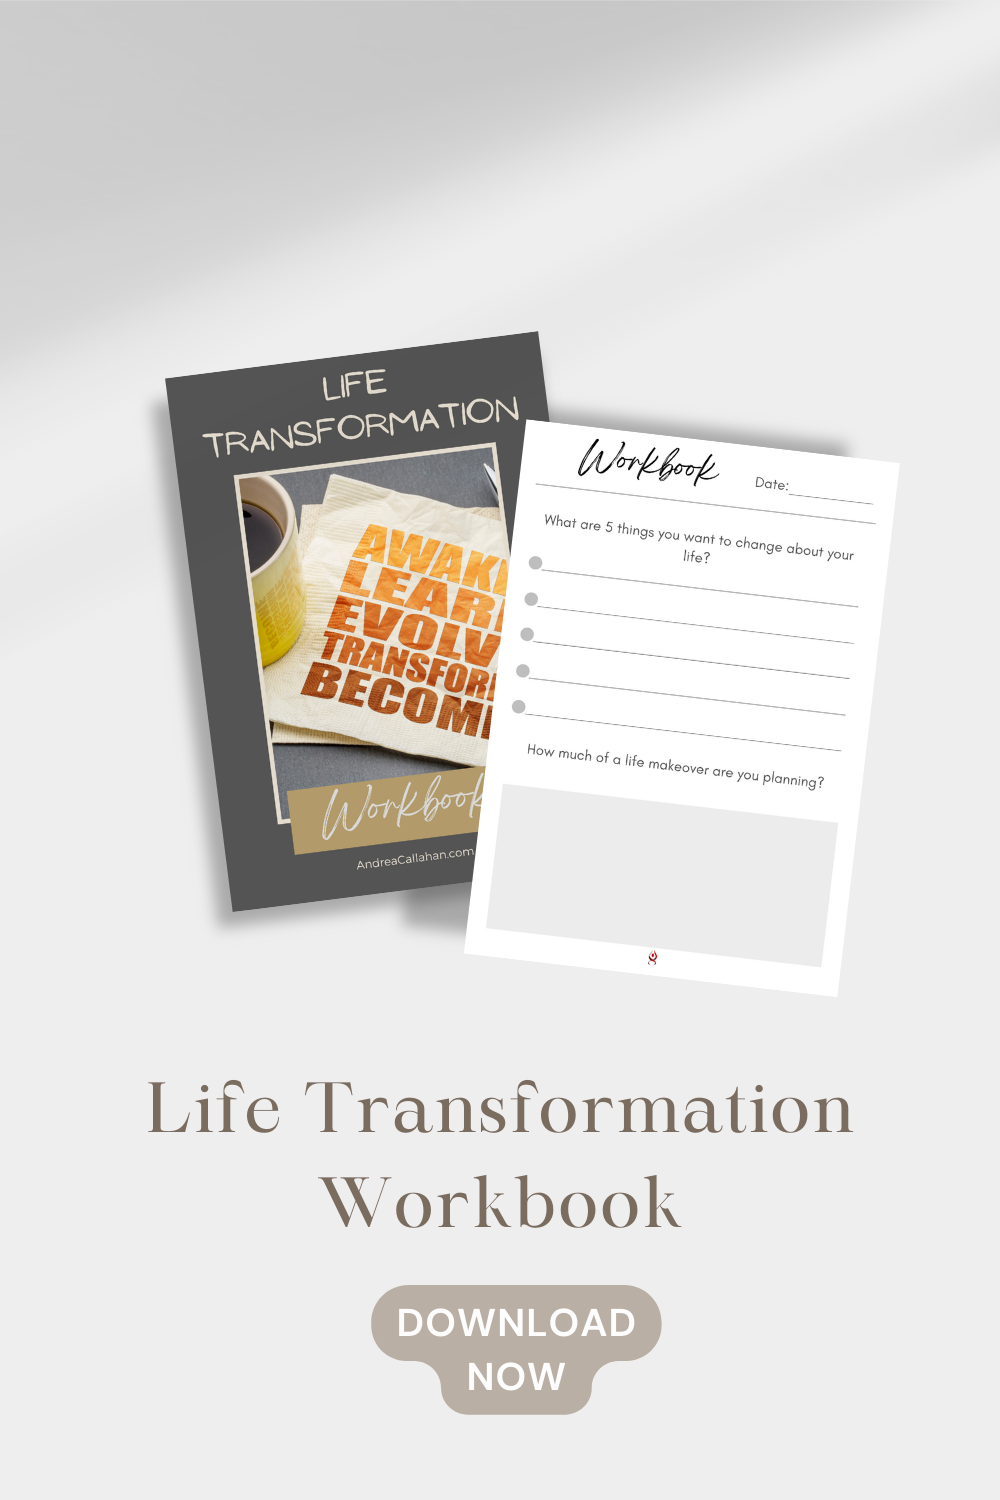 Life Transformation Workbook with Andrea Callahan